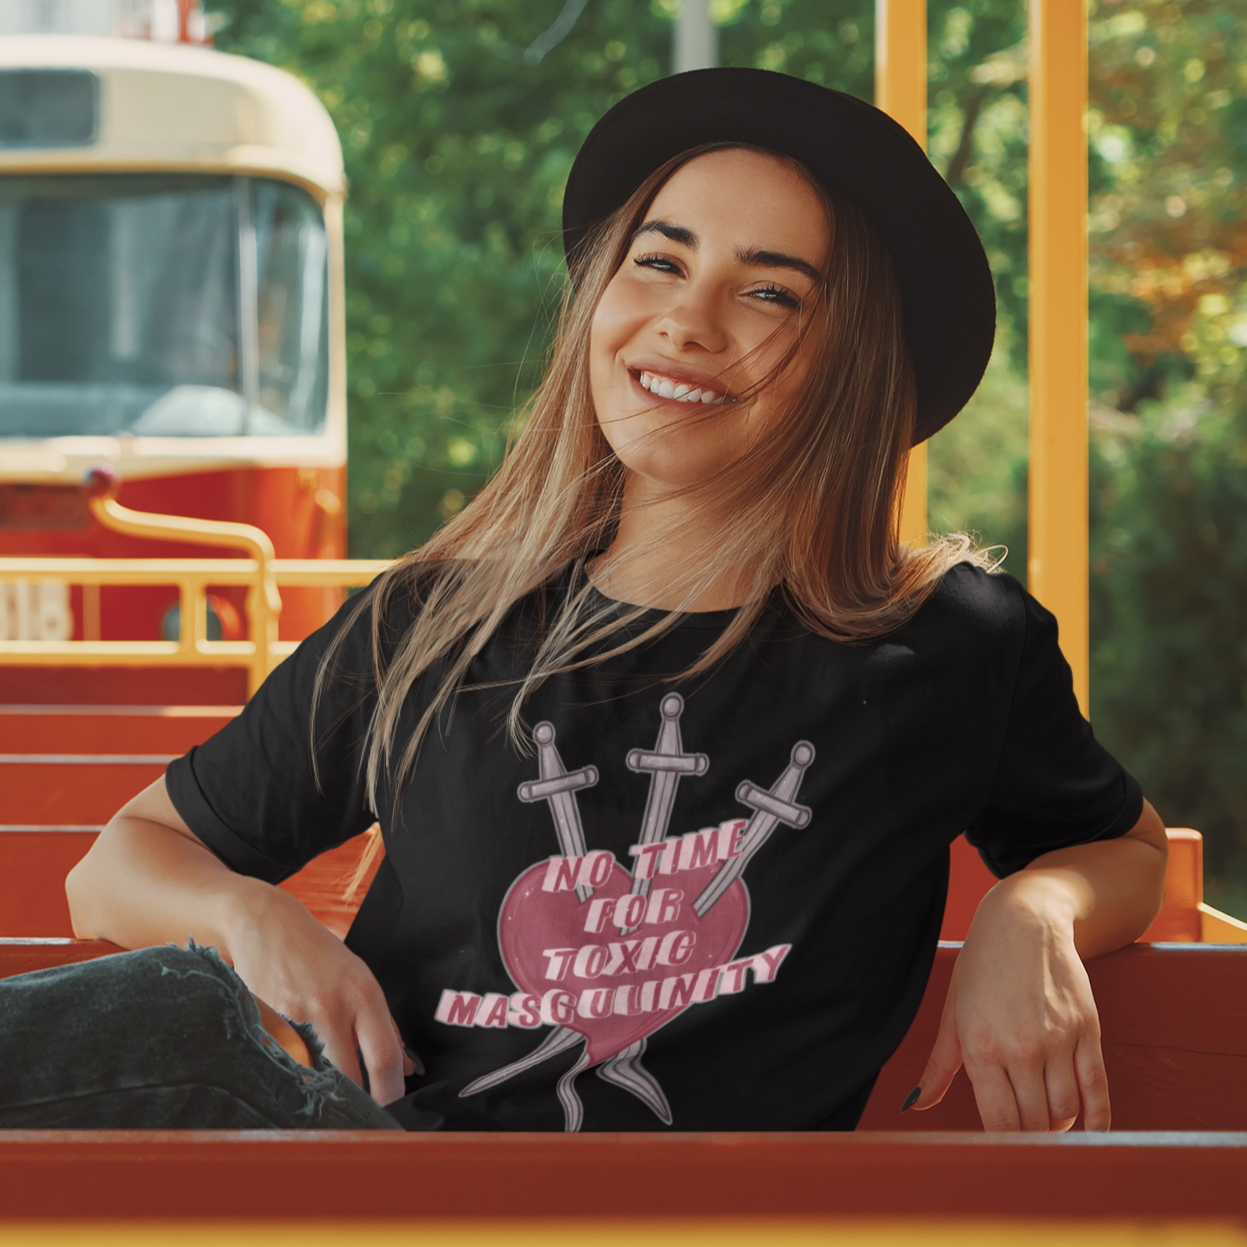 Black feminist t-shirt with 'No Time for Toxic Masculinity' text and Three of Swords tarot imagery, advocating against harmful gender stereotypes. Shop feminist apparel